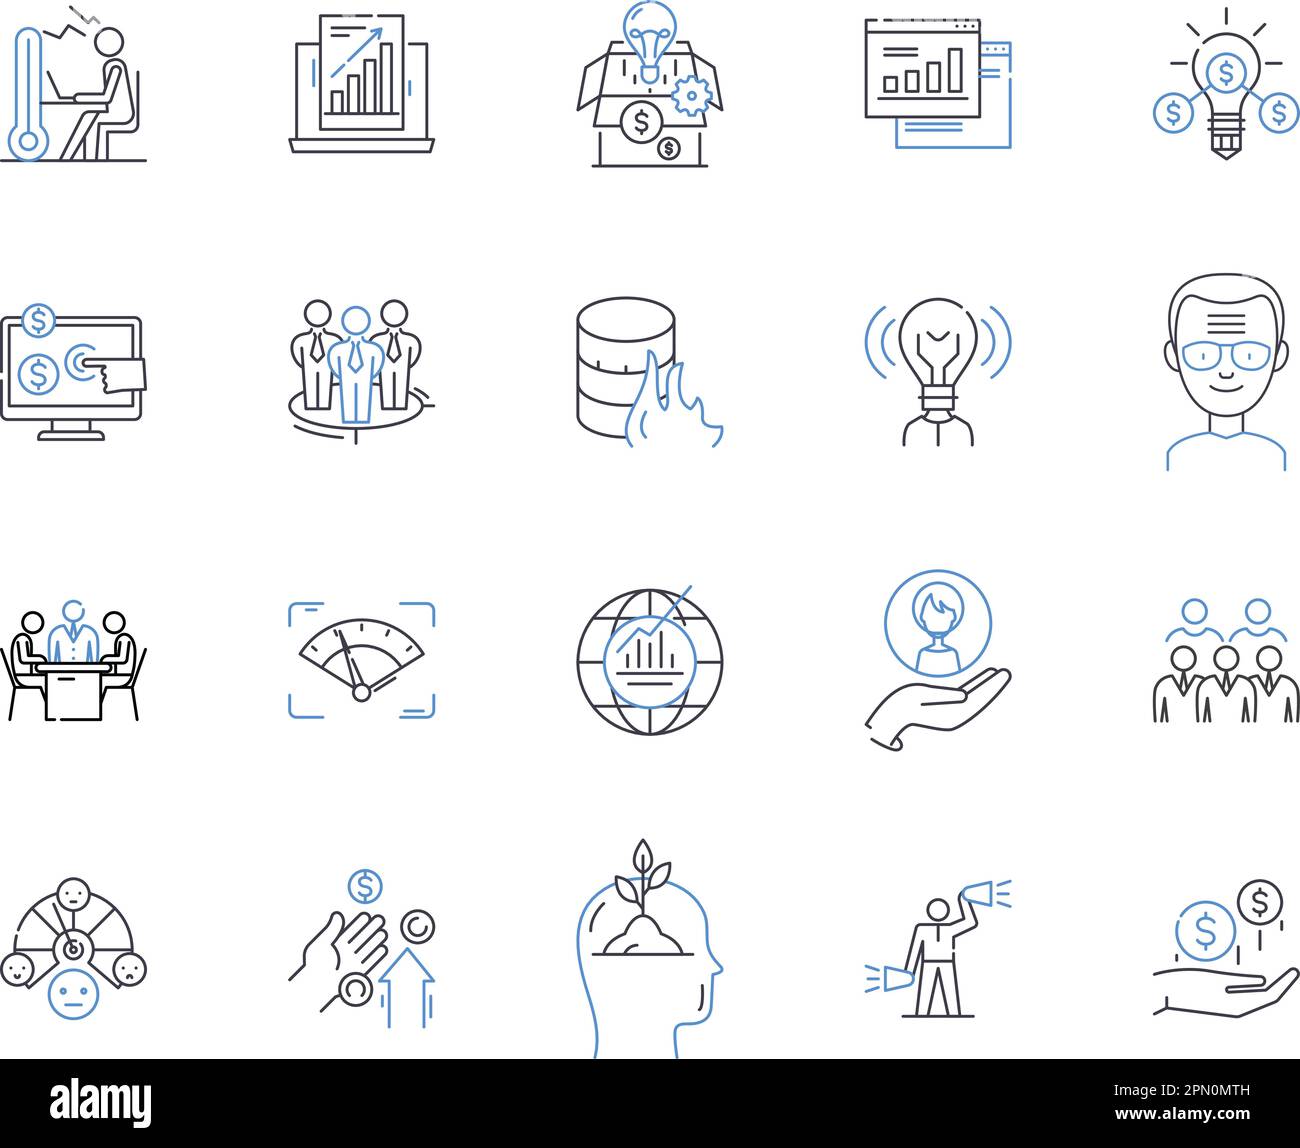 Bookkeeping outline icons collection. Bookkeeping, Accounting, Finances, Ledger, Records, Balance, Reconcile vector and illustration concept set Stock Vector